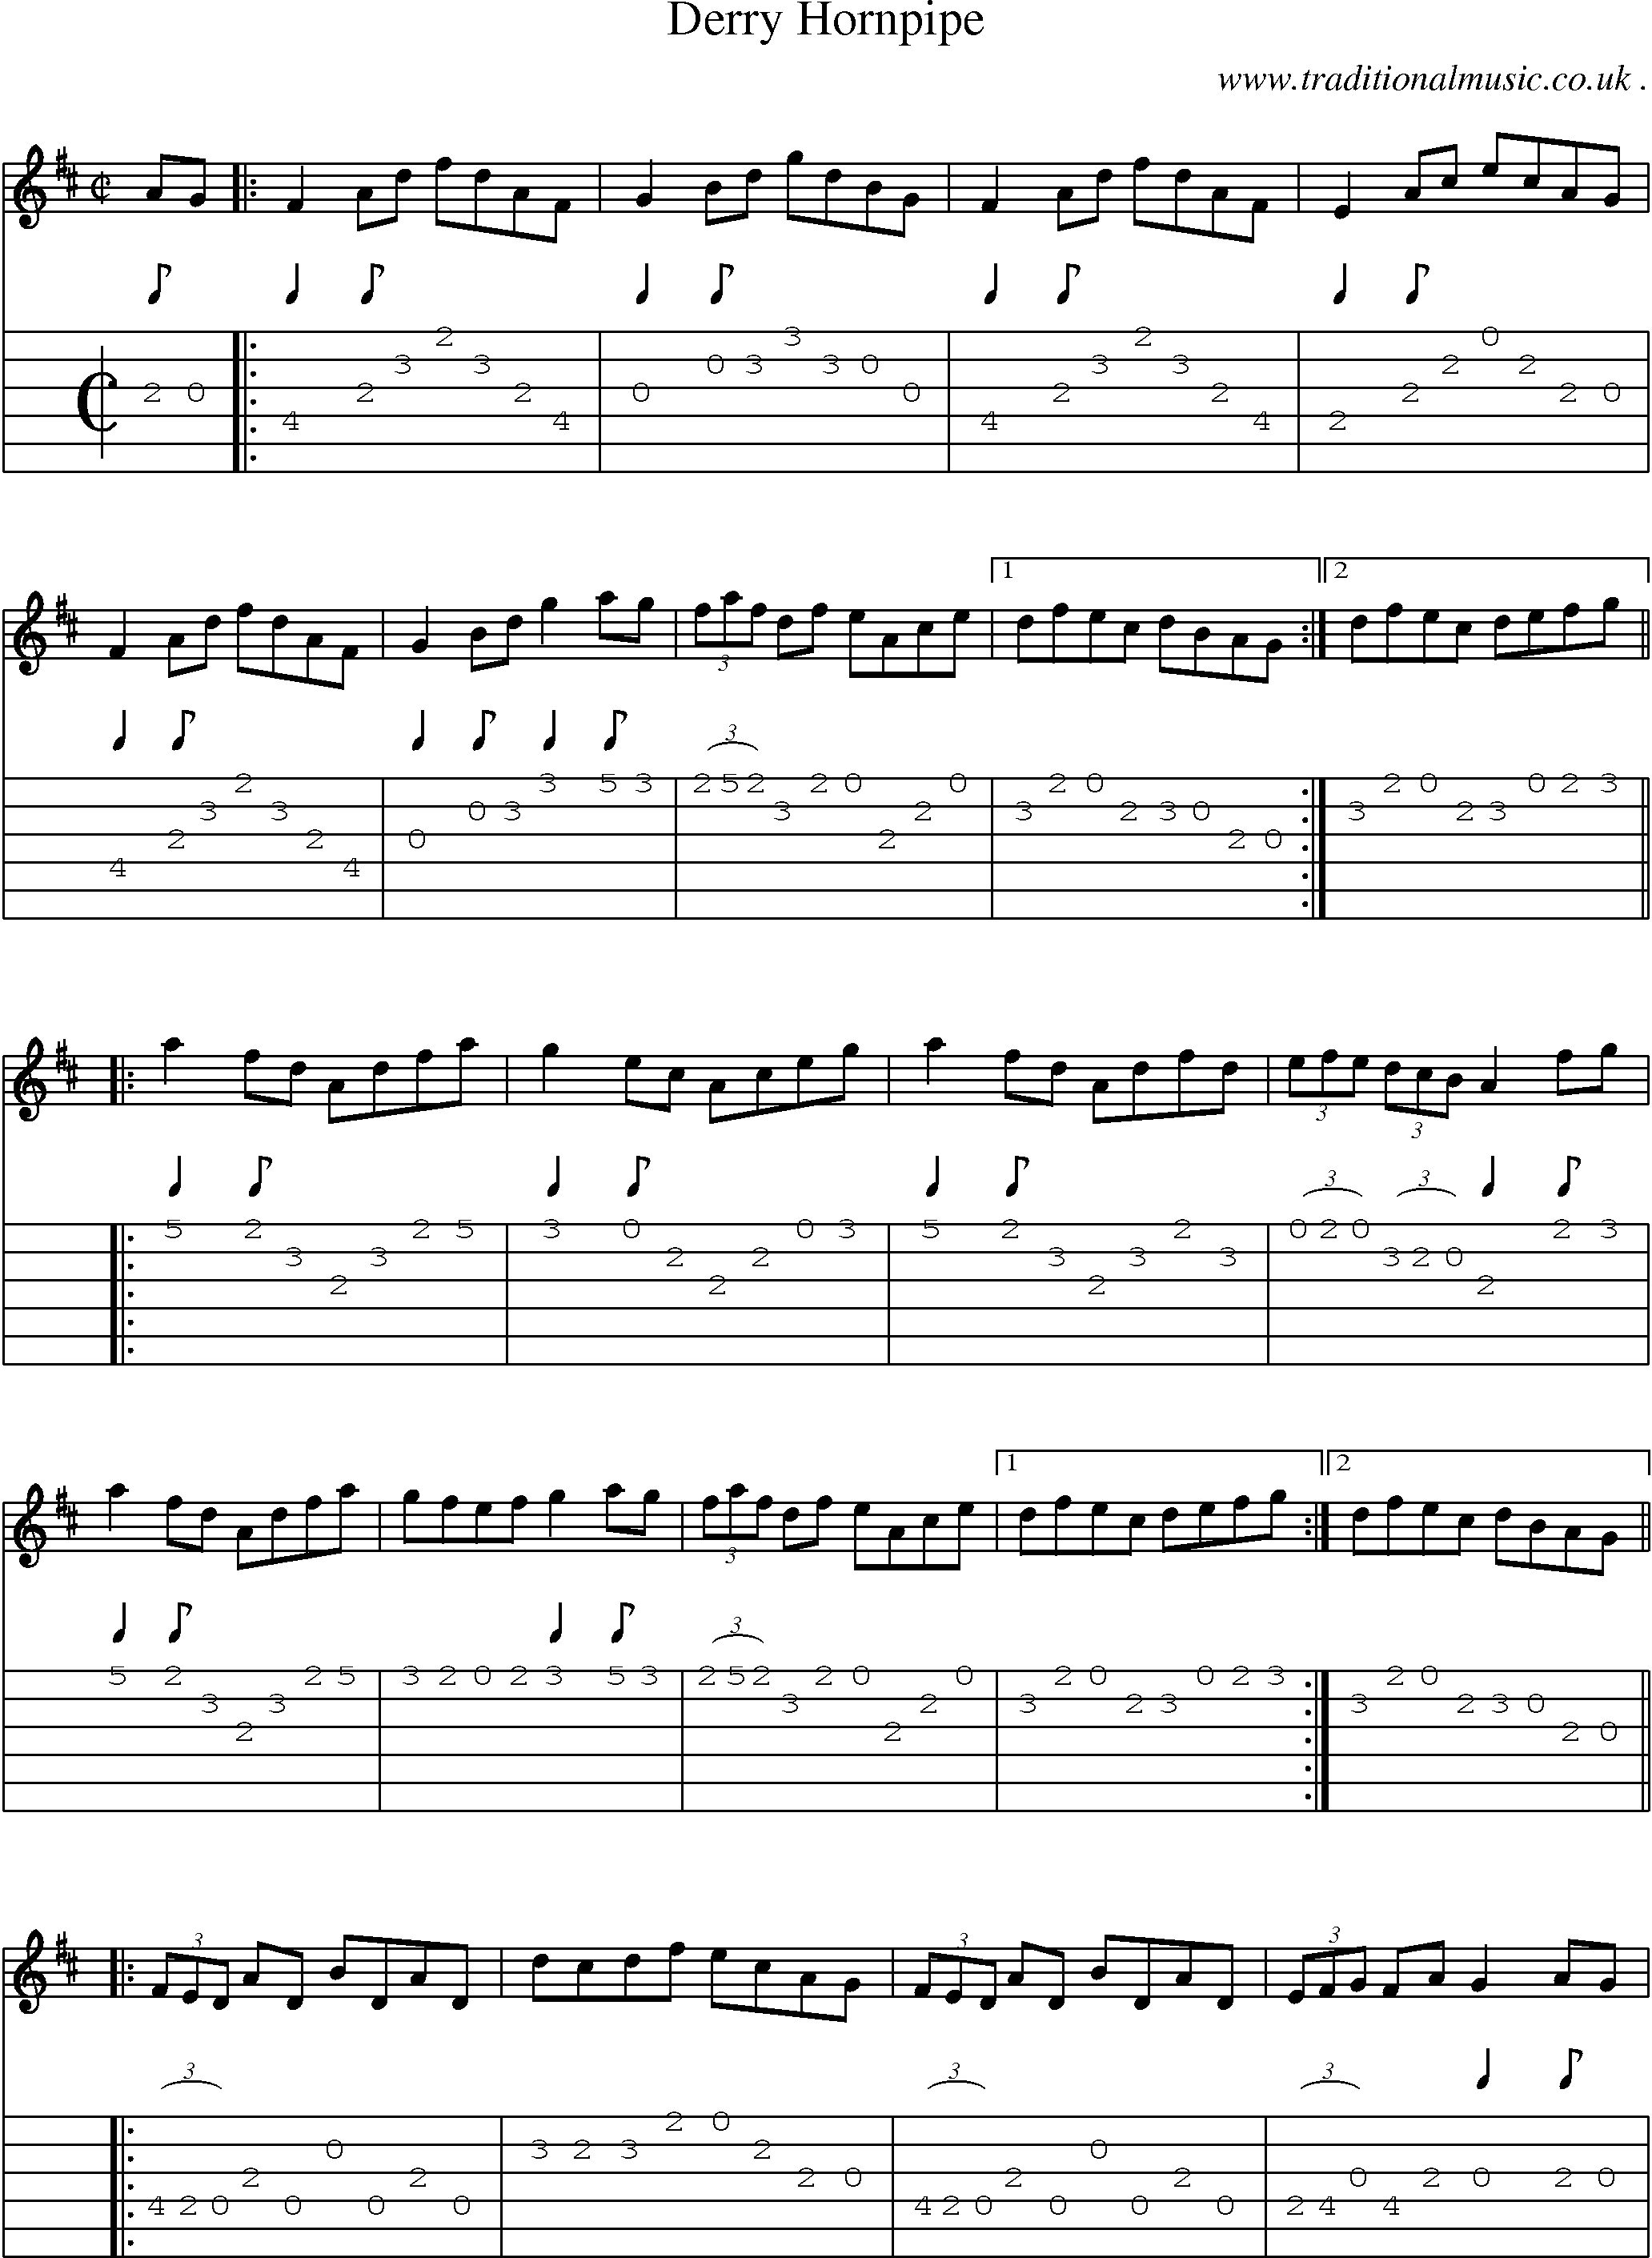 Sheet-Music and Guitar Tabs for Derry Hornpipe